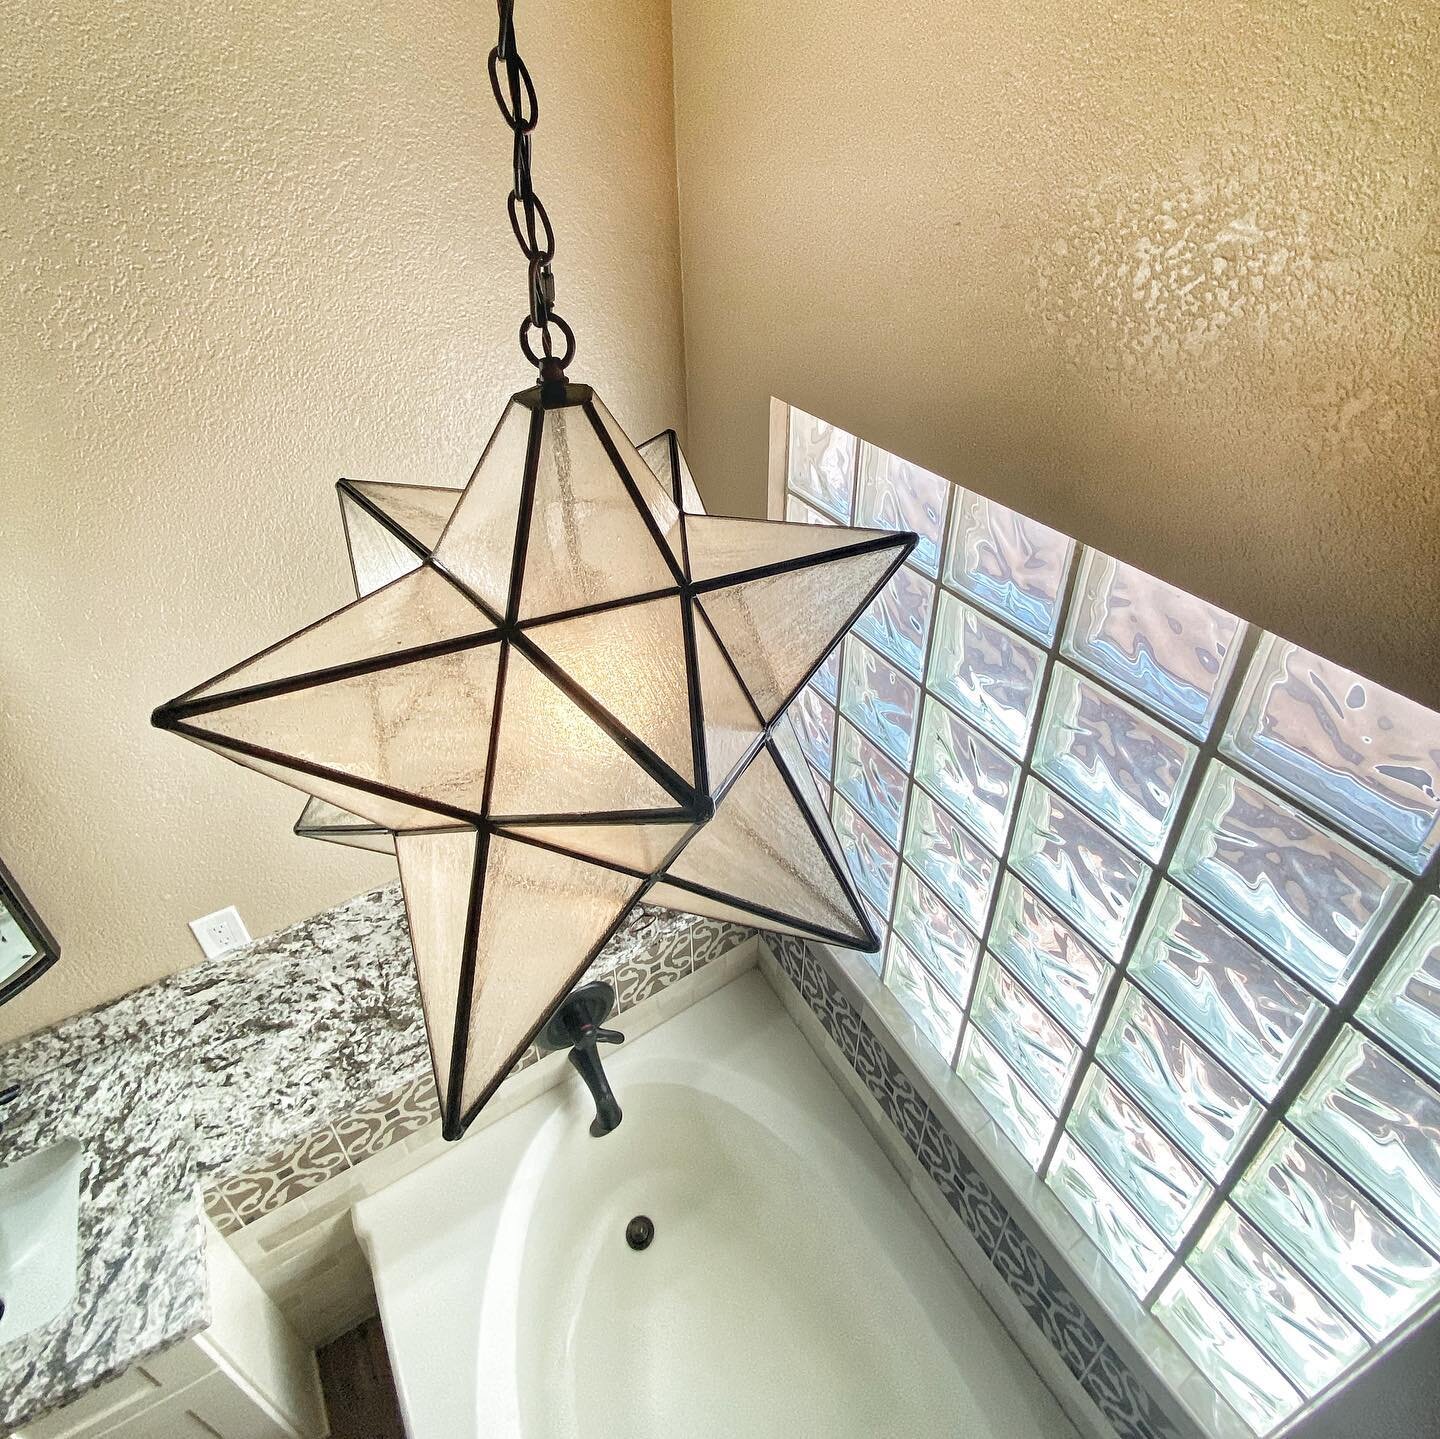 Sometimes all it takes is a star light to make a difference! Stay Safe &amp; Keep THRIVING
&bull;
&bull;
&bull;
#residential #construction #entrepreneur #Interiordesign #loveyourwork #generalcontractor #womaninthetrades #nawic #azcontractor #getitdon